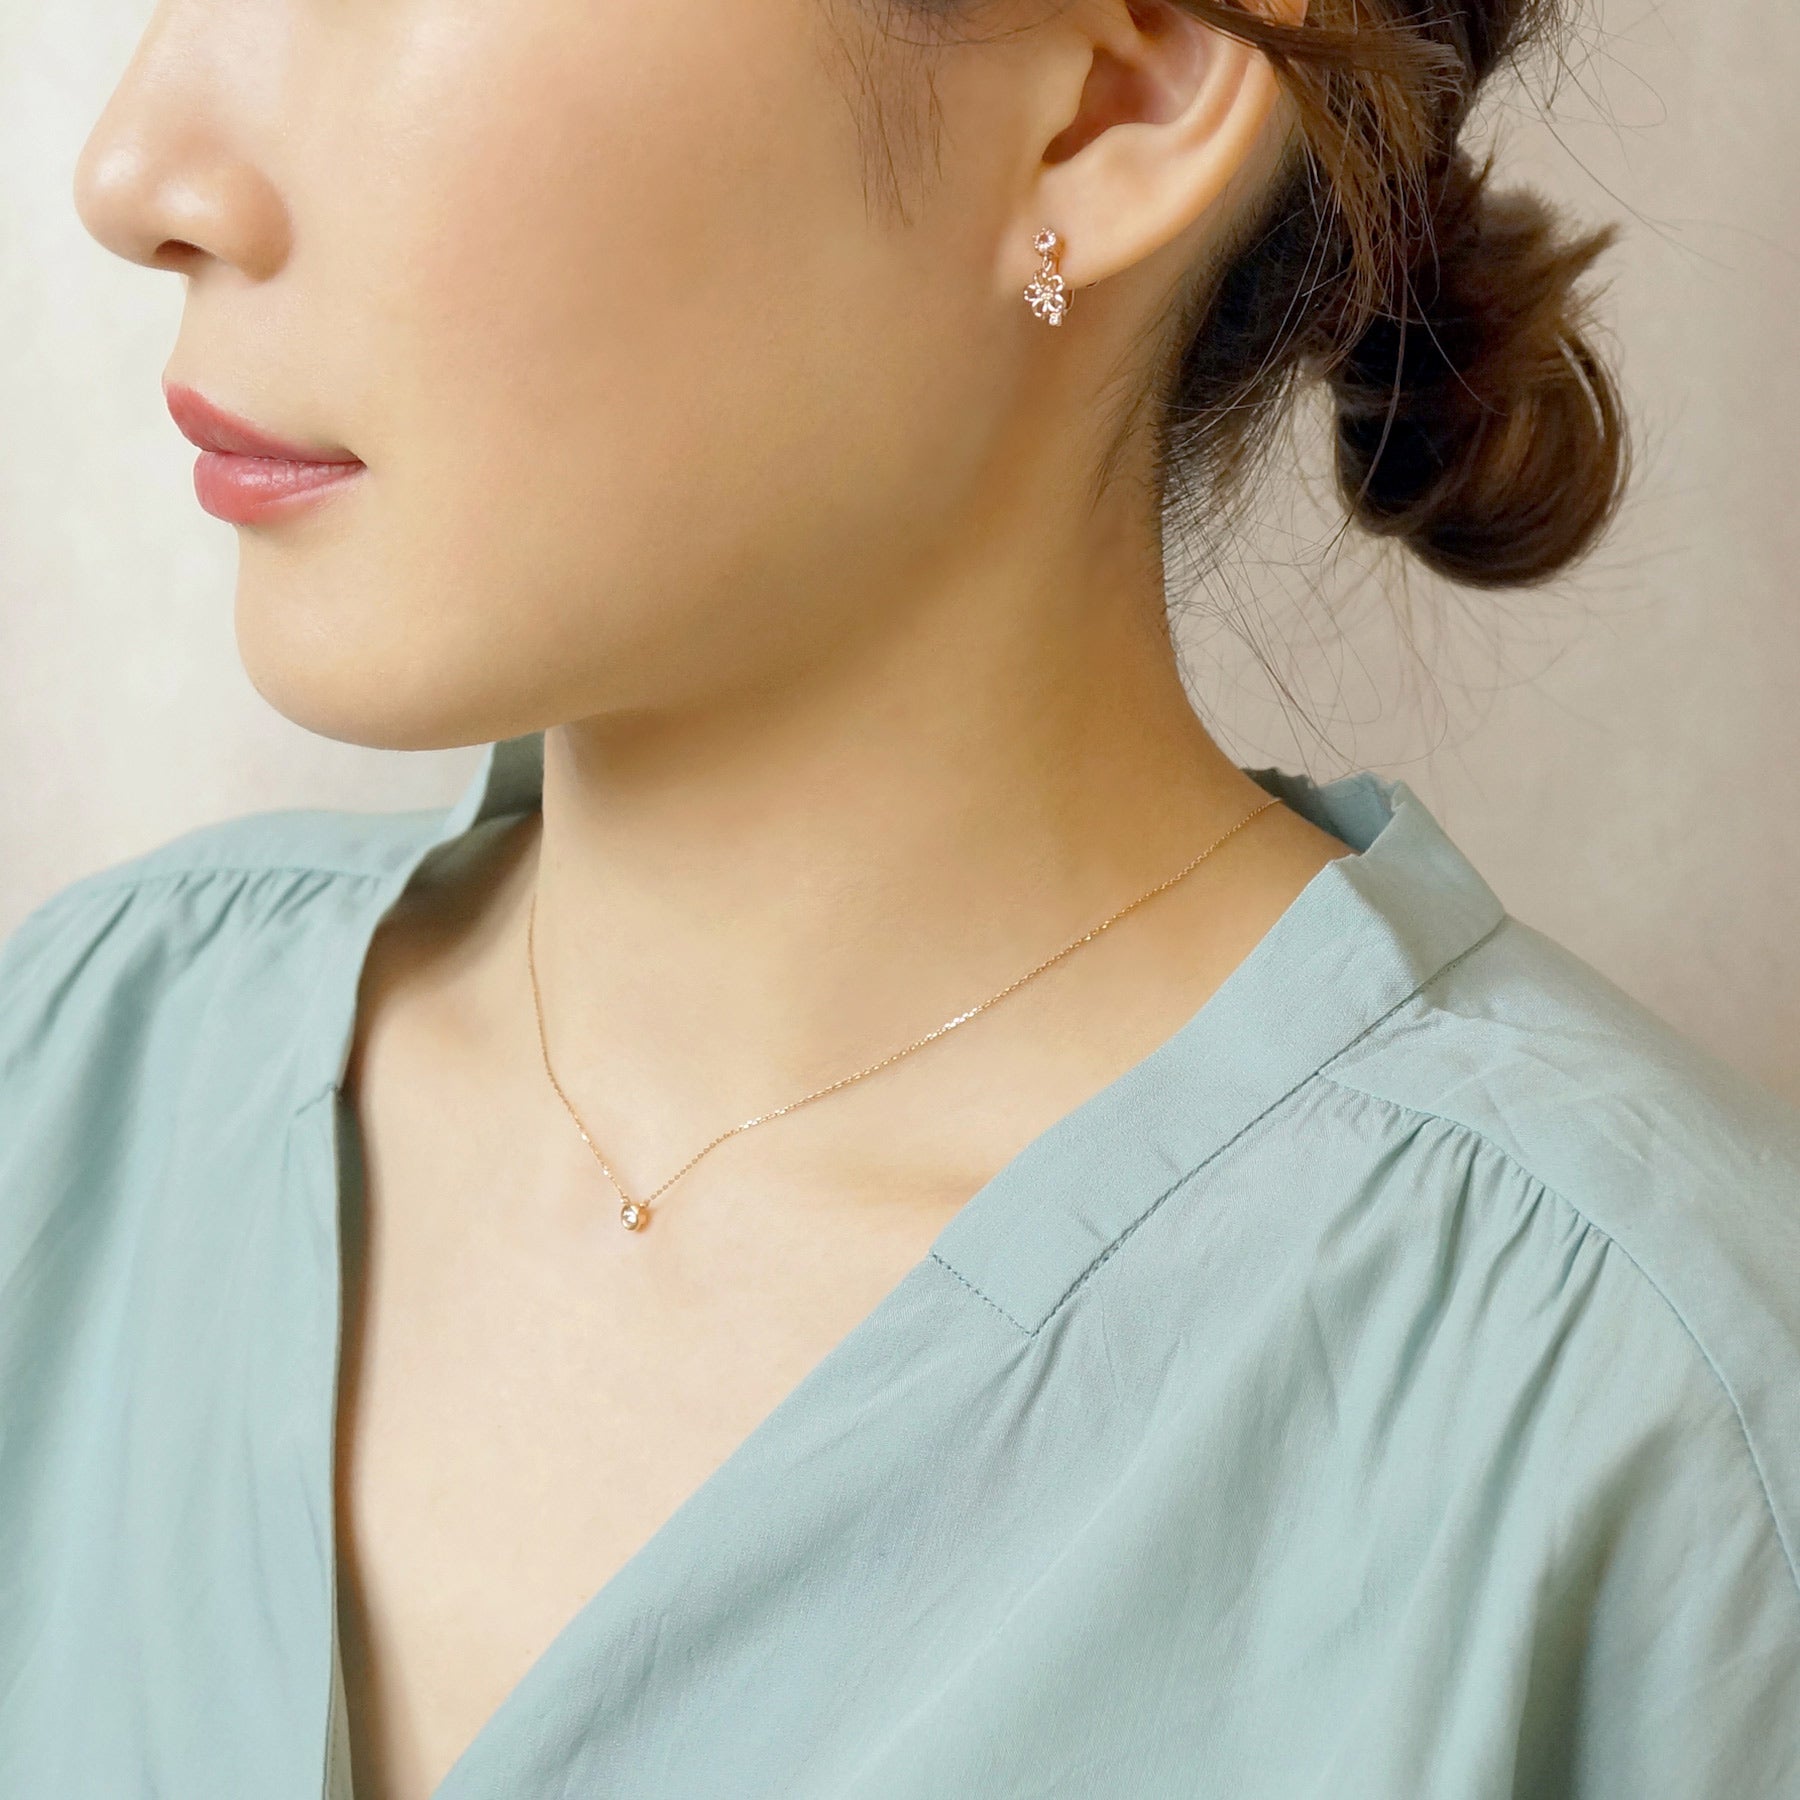 [Birth Flower Jewelry] April Cherry Blossoms Earrings - Model Image